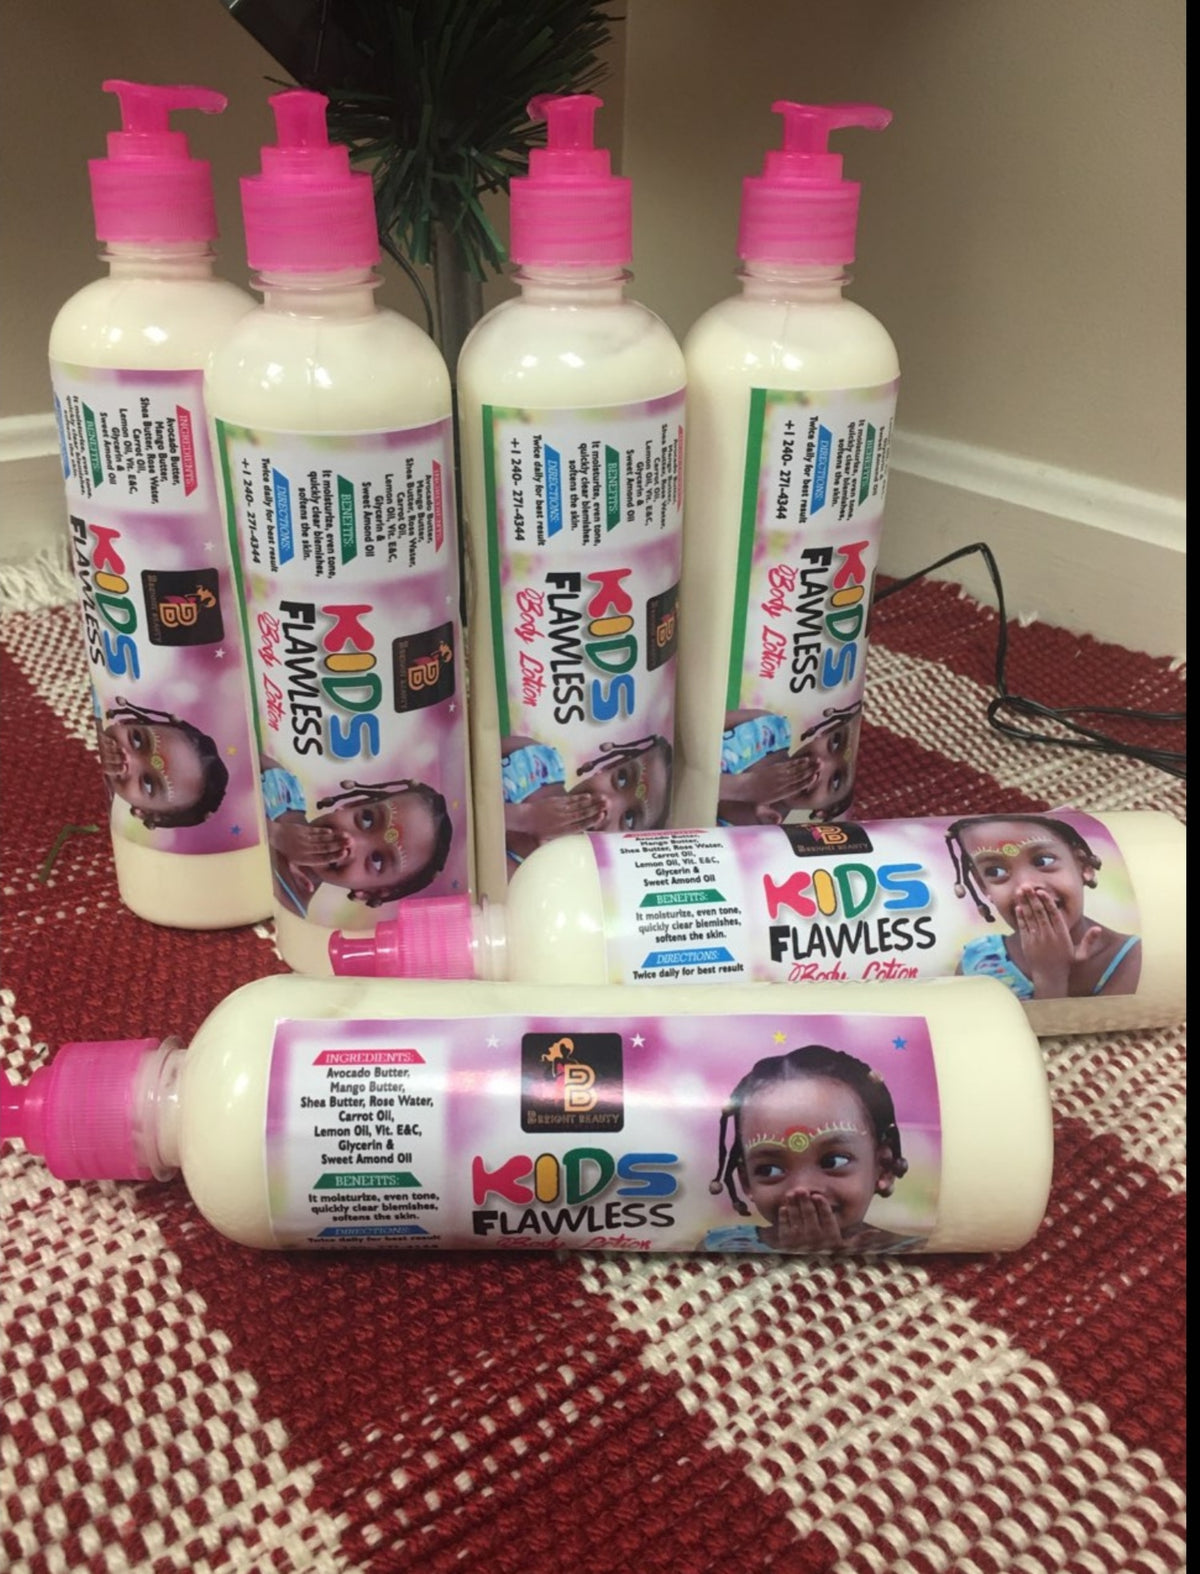 Kids Flawless Body Lotion 500ml(Now available only in bigger size)